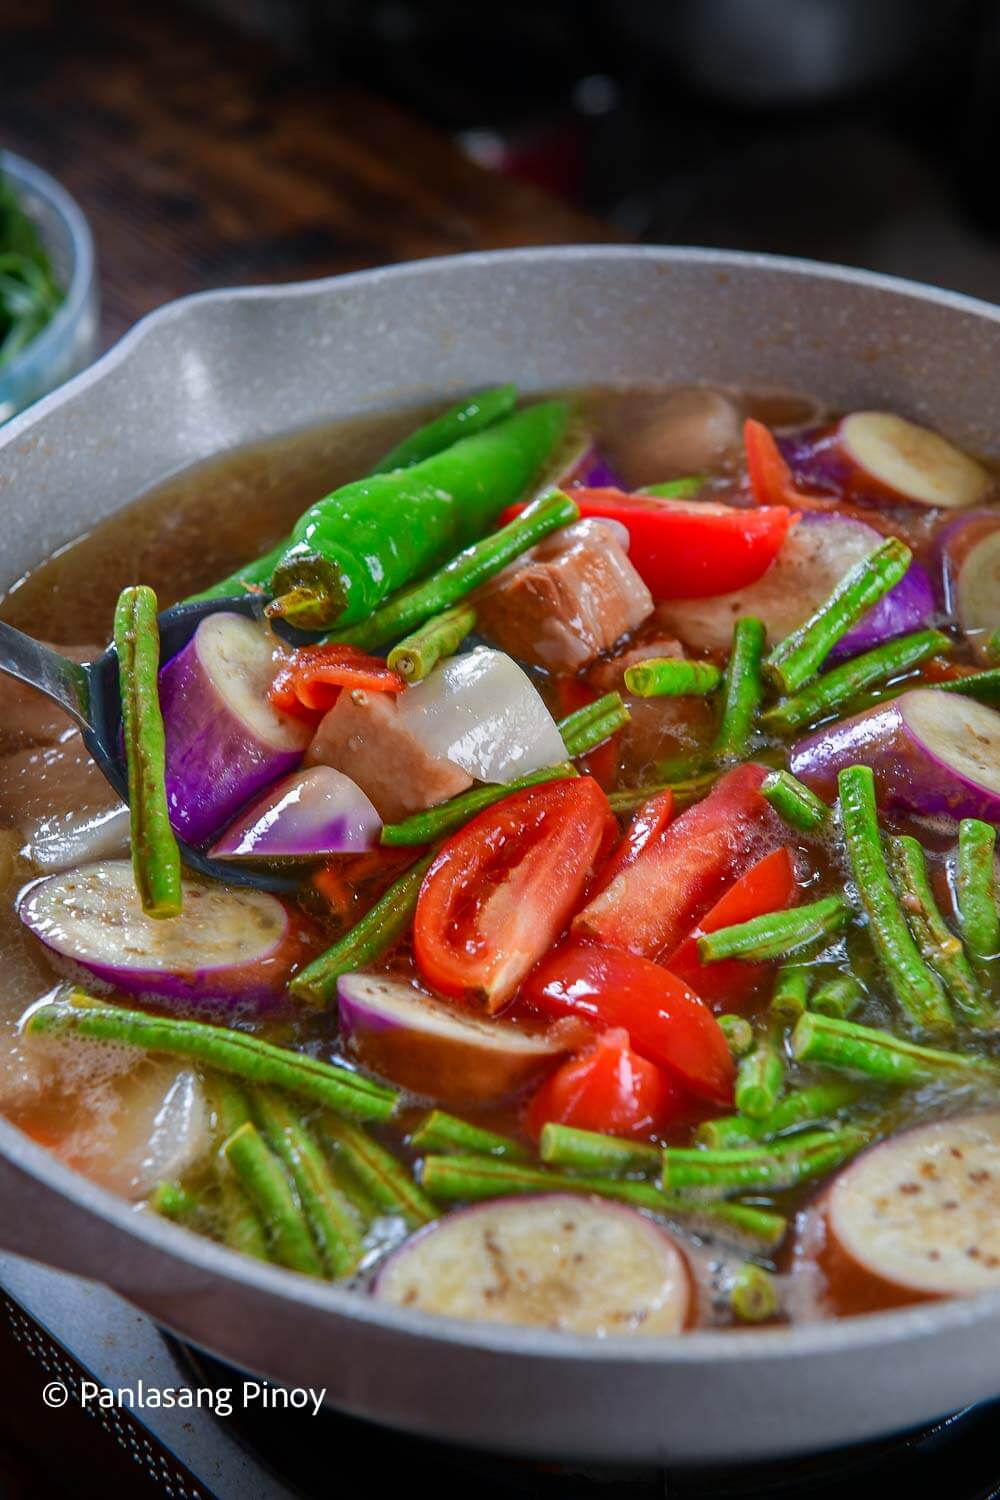 What is sinigang?